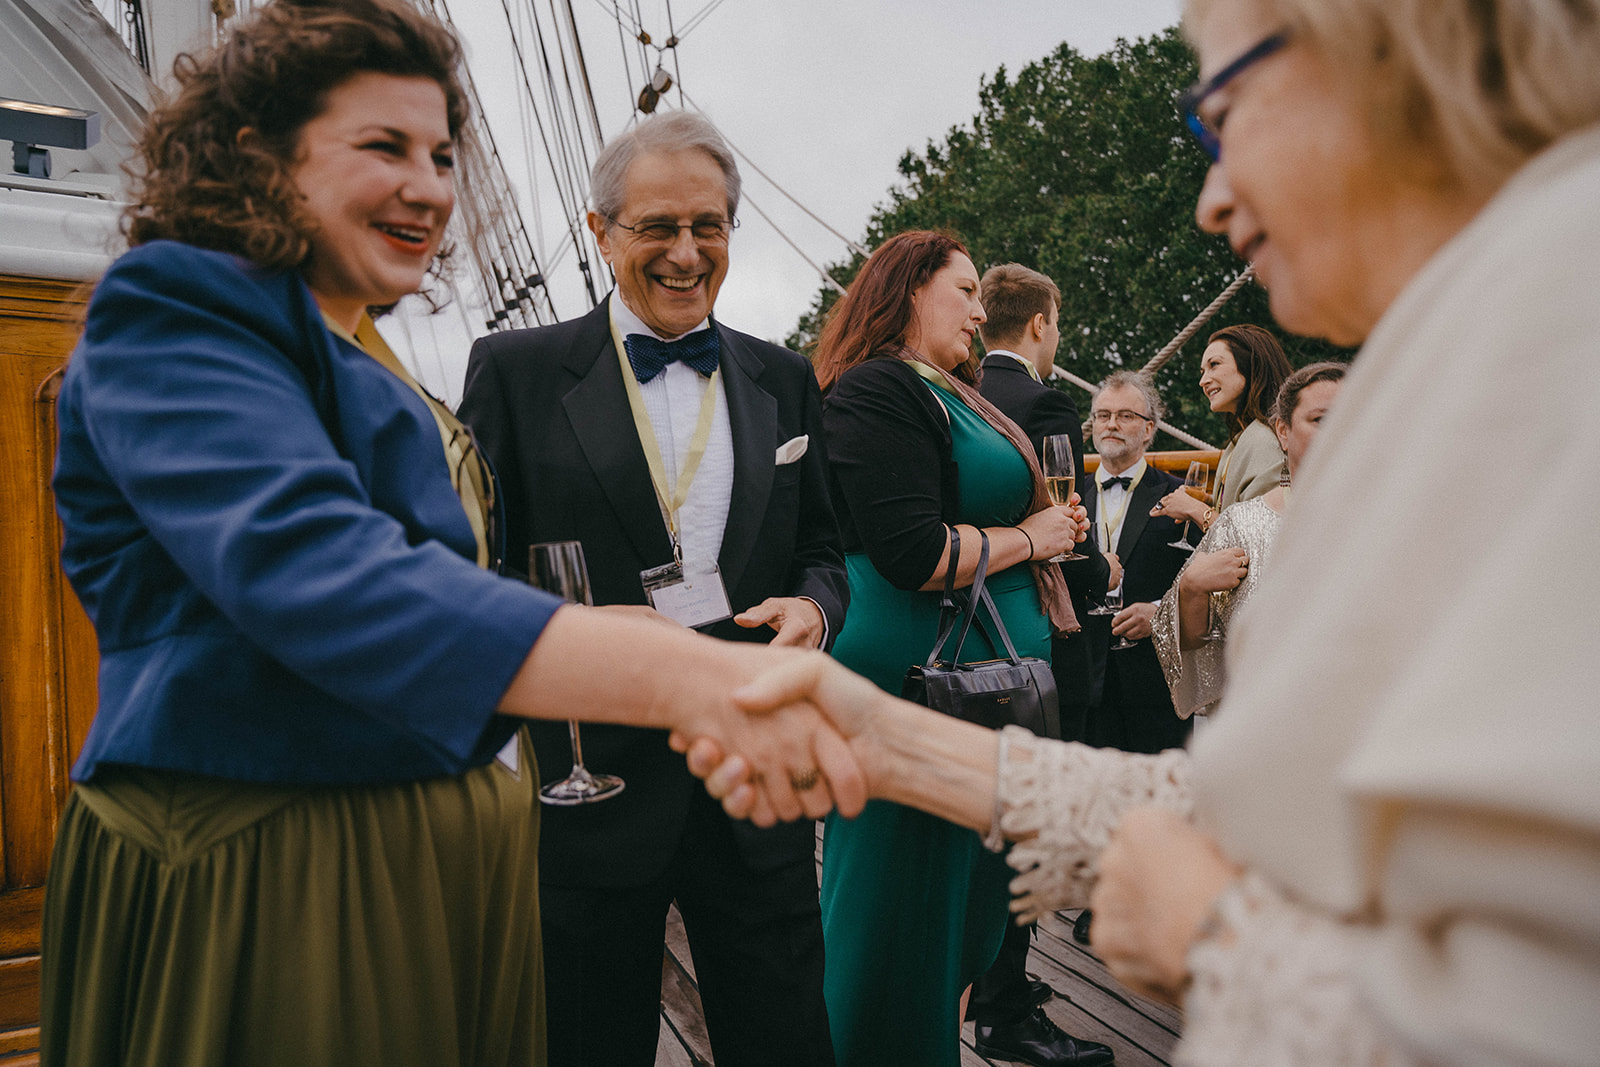 Alumni meet and shake hands over champagne on the deck of the Cutty Sark.